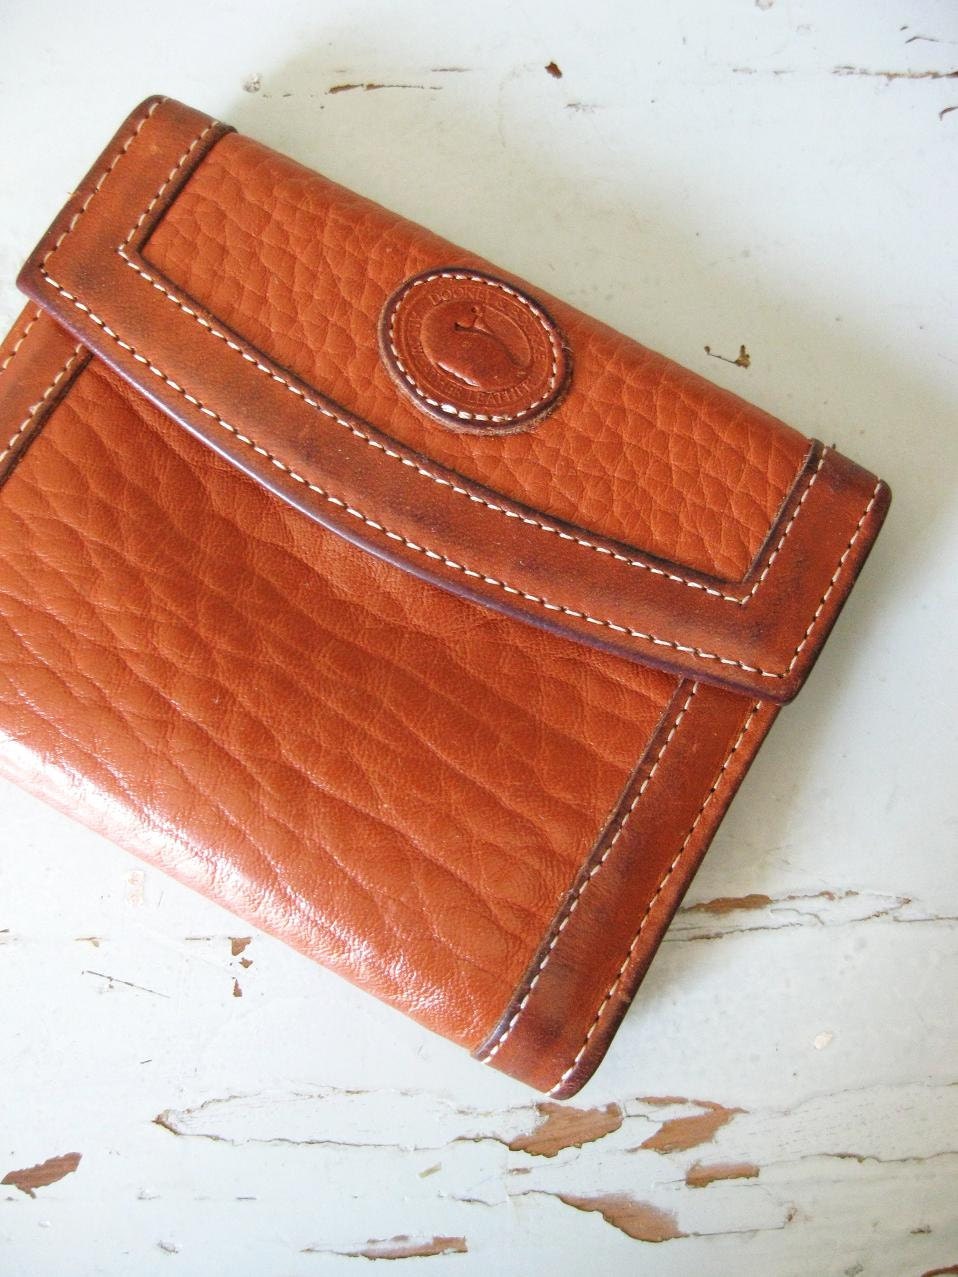 Vintage Dooney and Bourke Leather Wallet by Swoonshop on Etsy